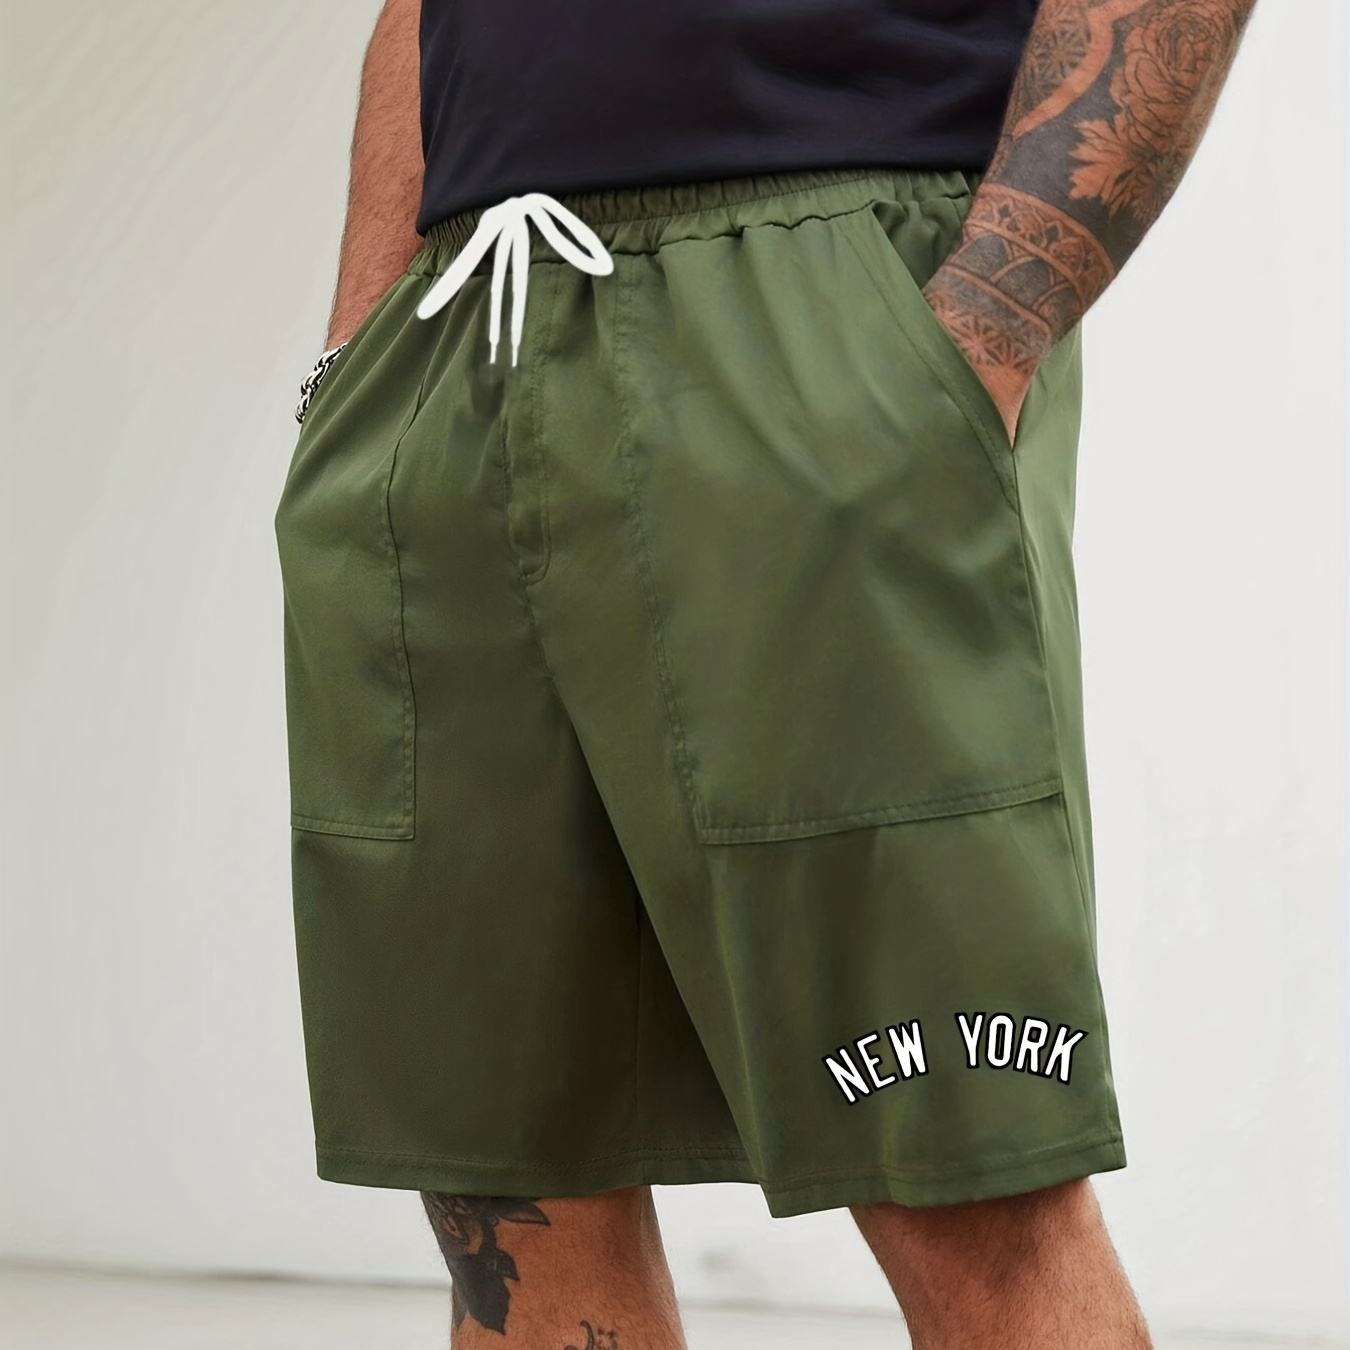 

Men's Plus Size Streetwear Cargo Shorts, New York Graphic Print Drawstring Stretchy Short Pants With Pockets For Comfort & Casual Chic Style, Summer Clothings